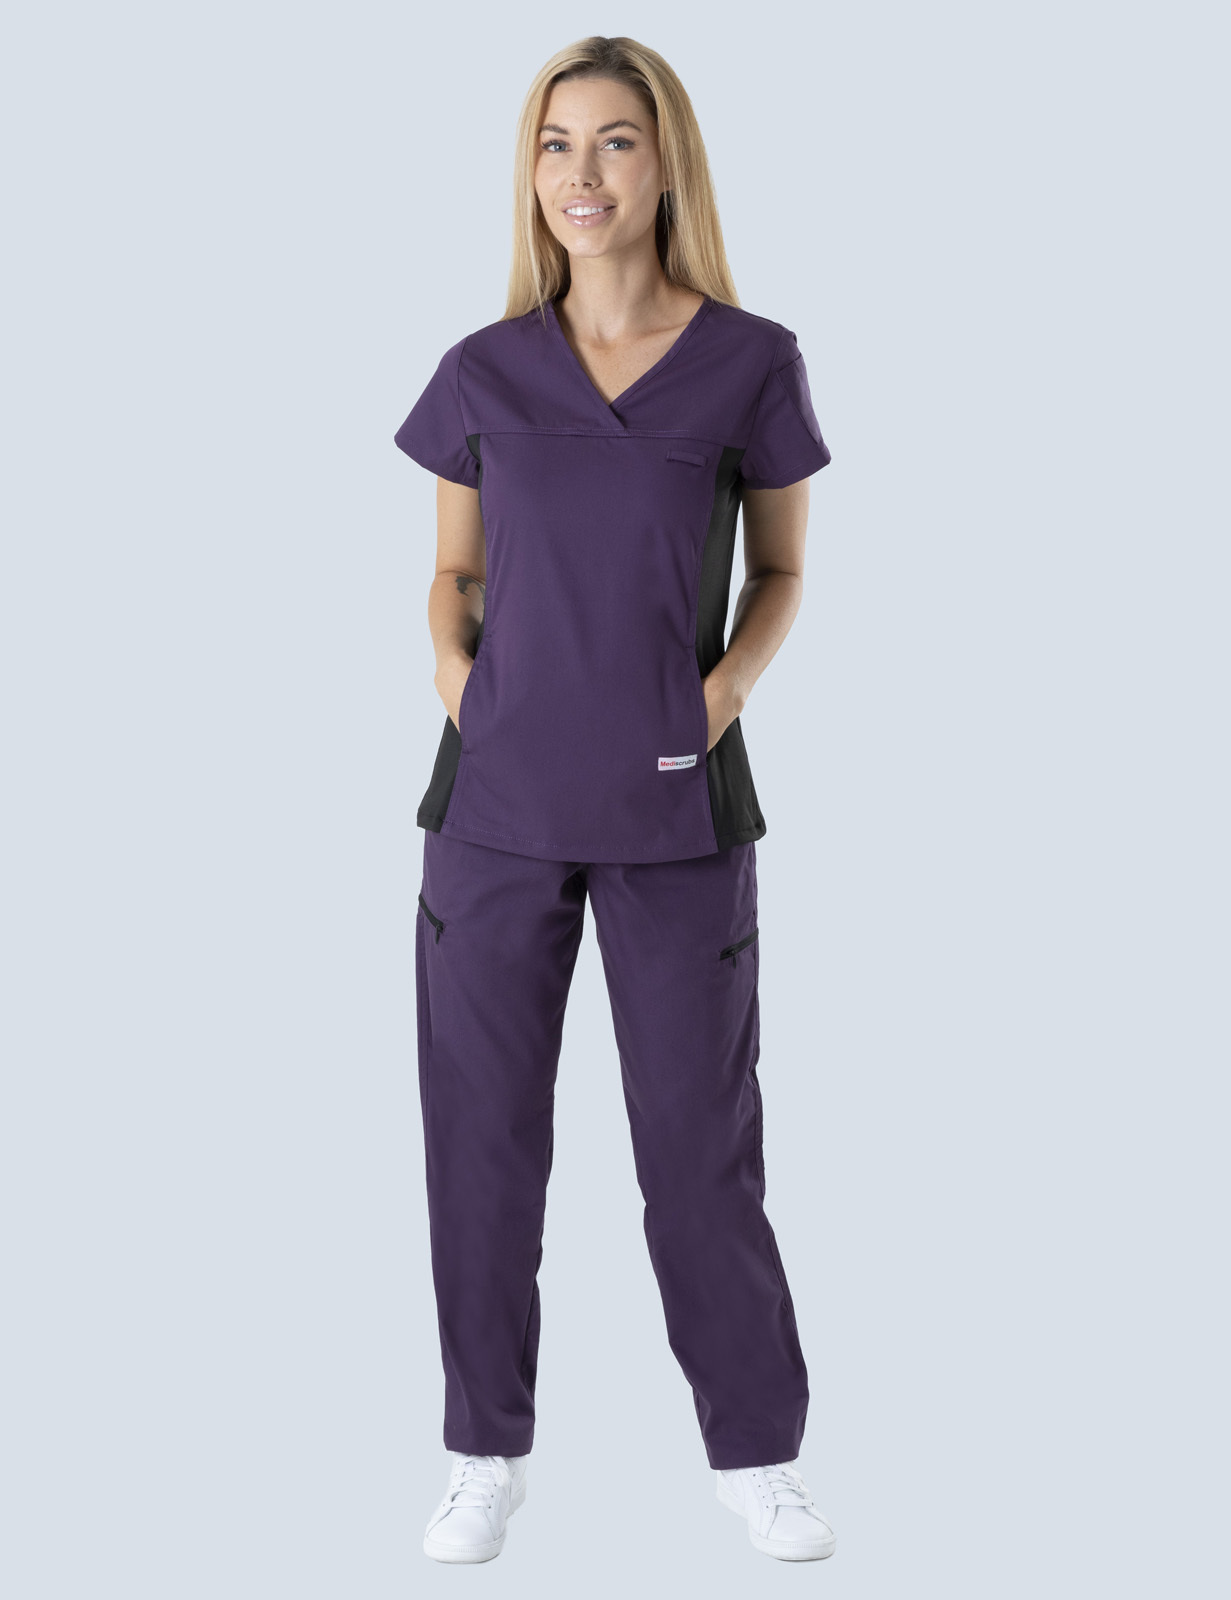 Women's Fit Solid Scrub Top With Spandex Panel - Aubergine - Large